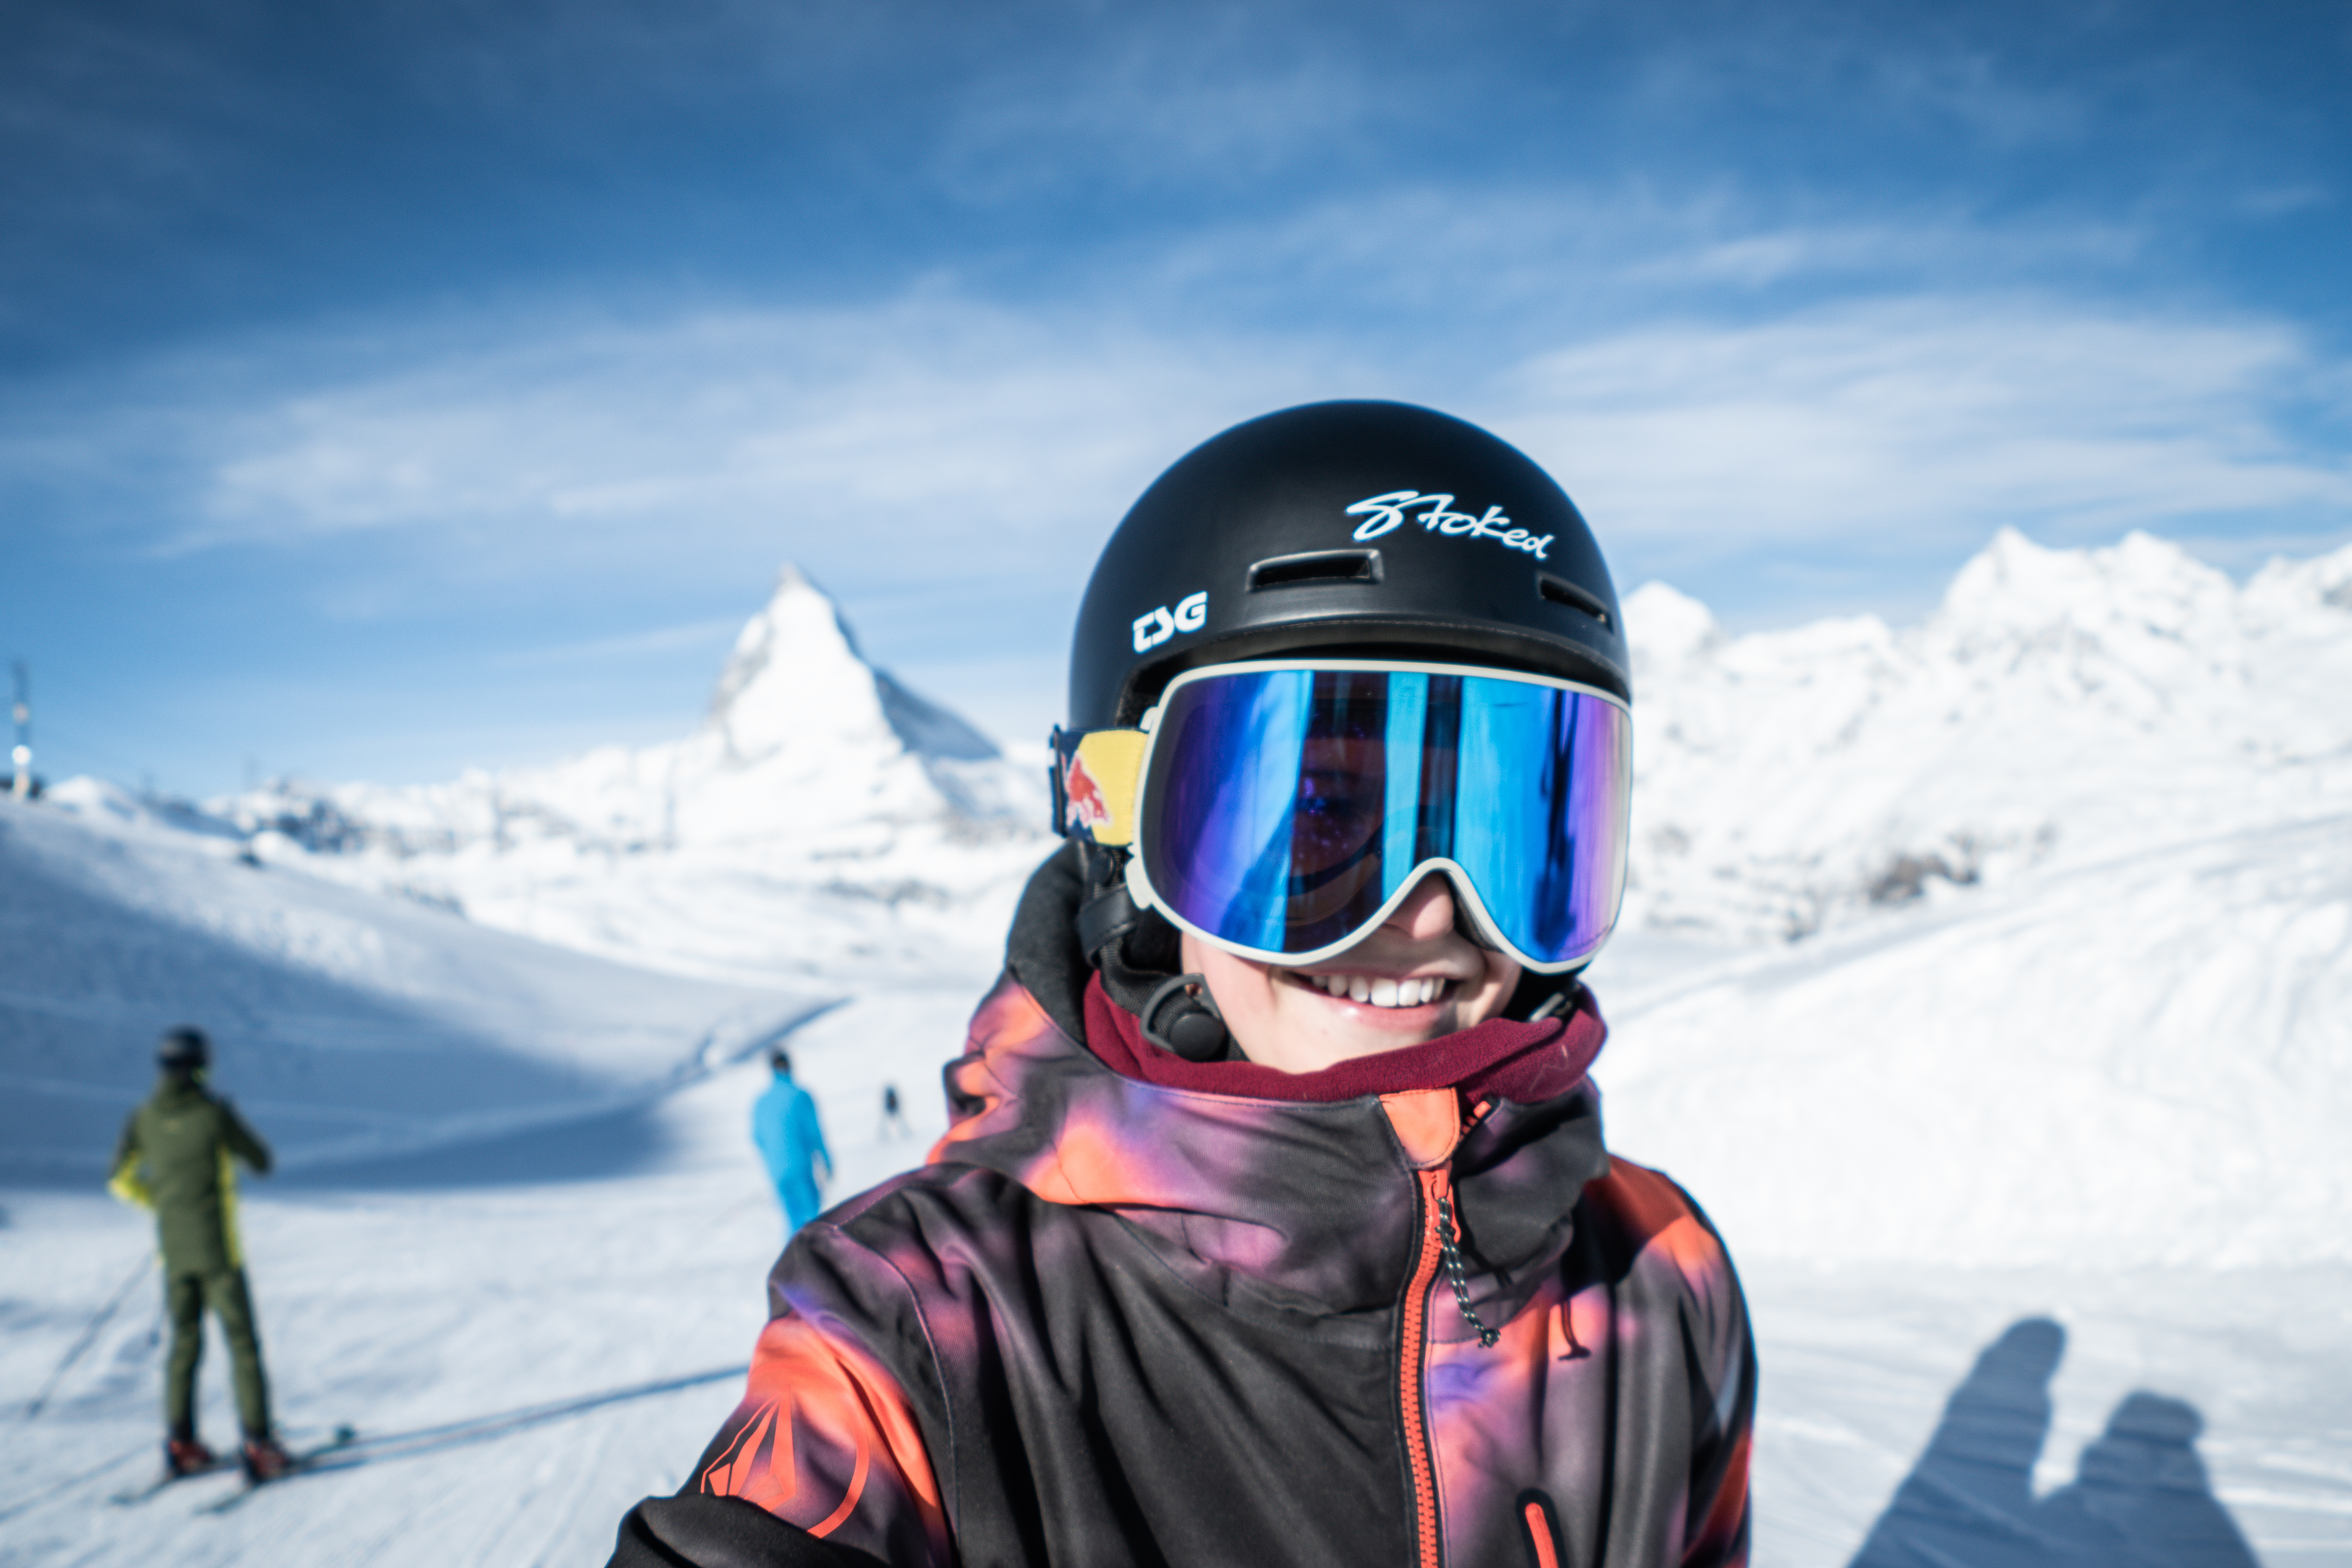 Experience winter sports vacations anew!